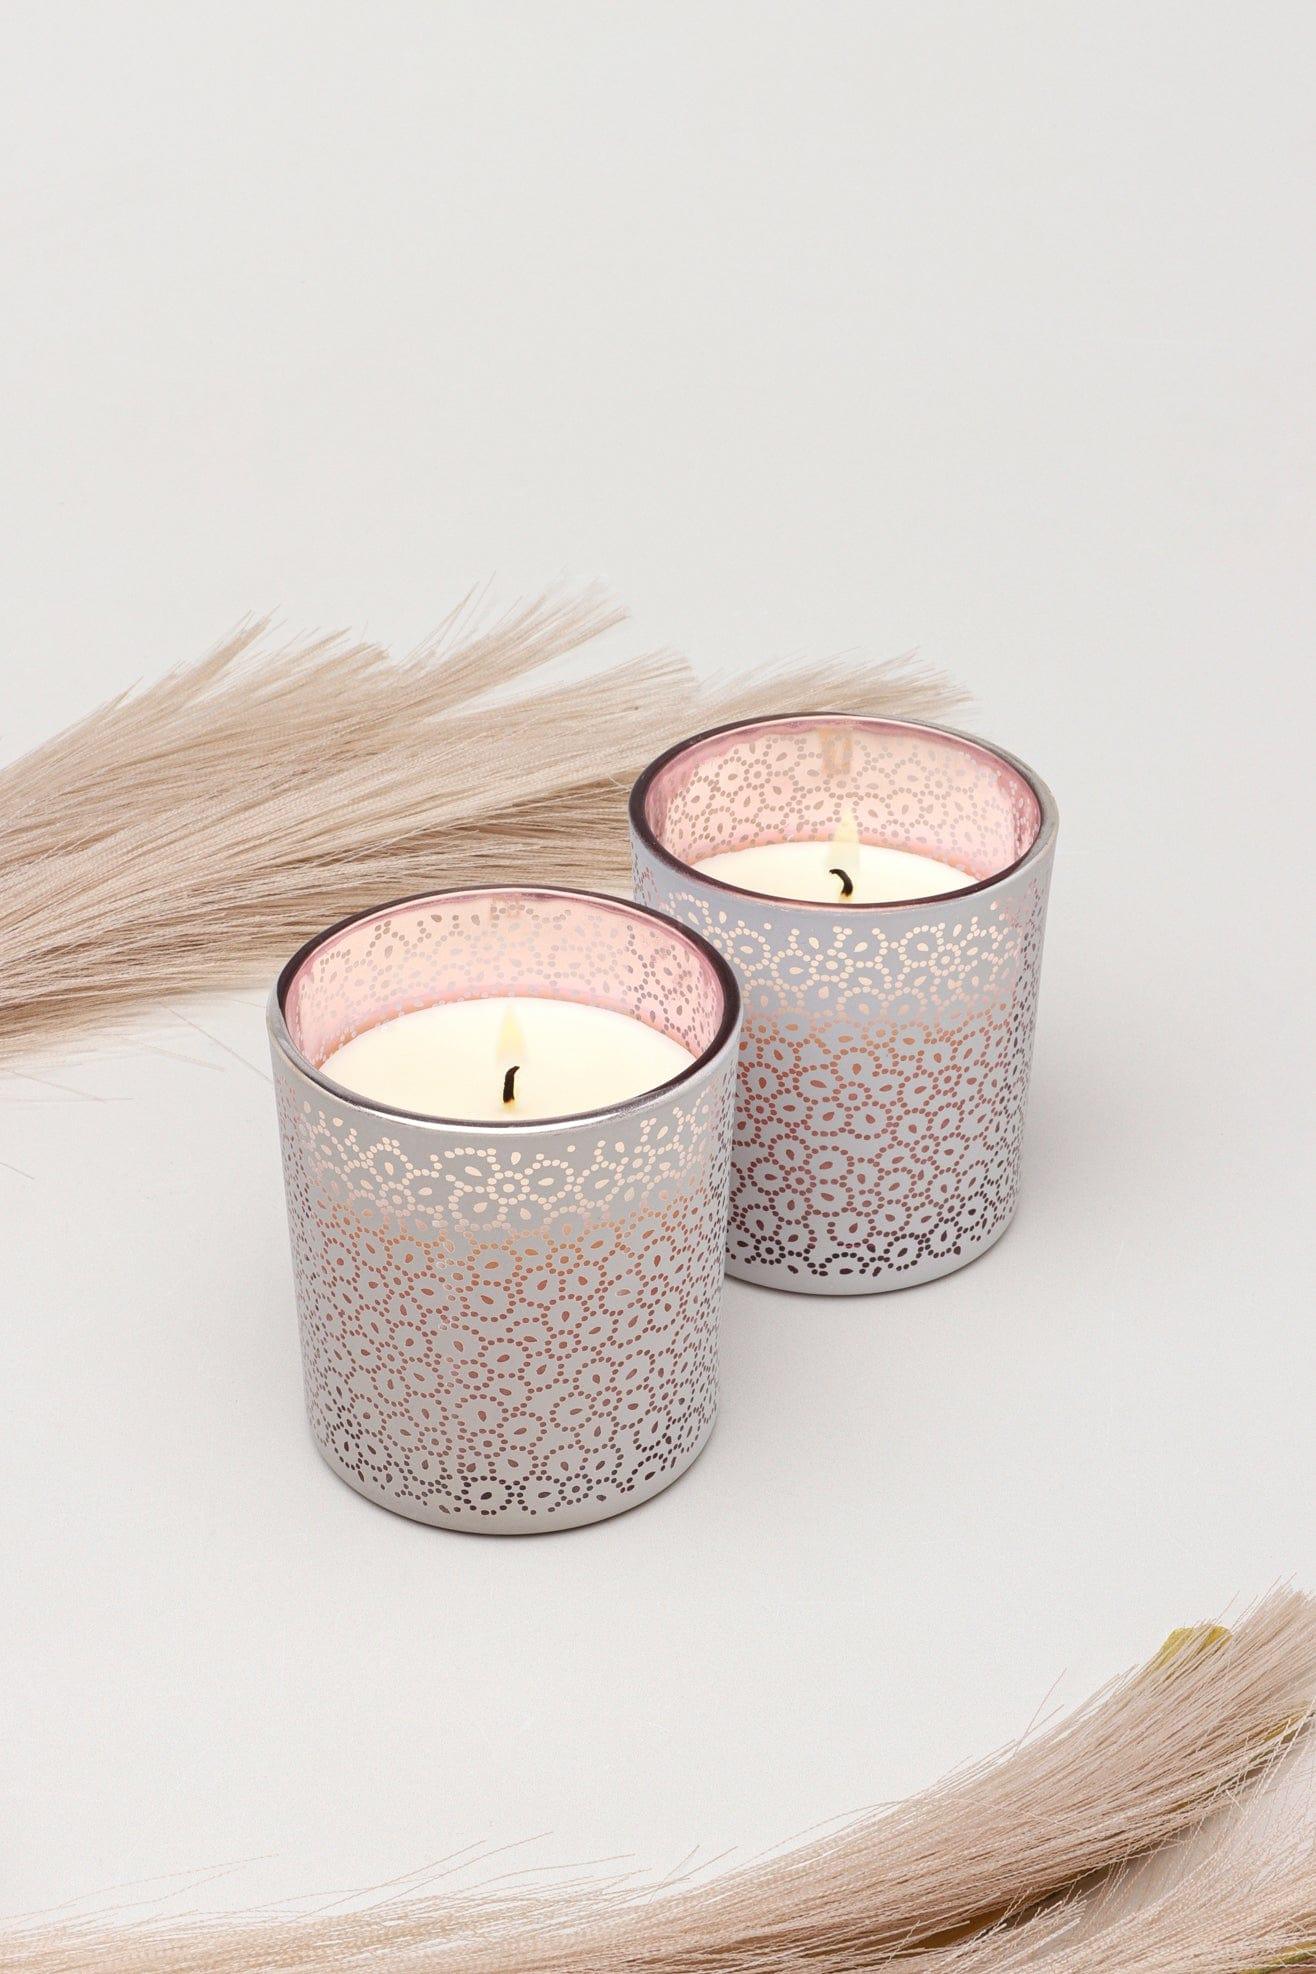 G Decor Candles & Candle Holders Set of Two Pink Havana Pair Scented Fresh Moso Bamboo Soy Wax Textured Pink Glass Jars